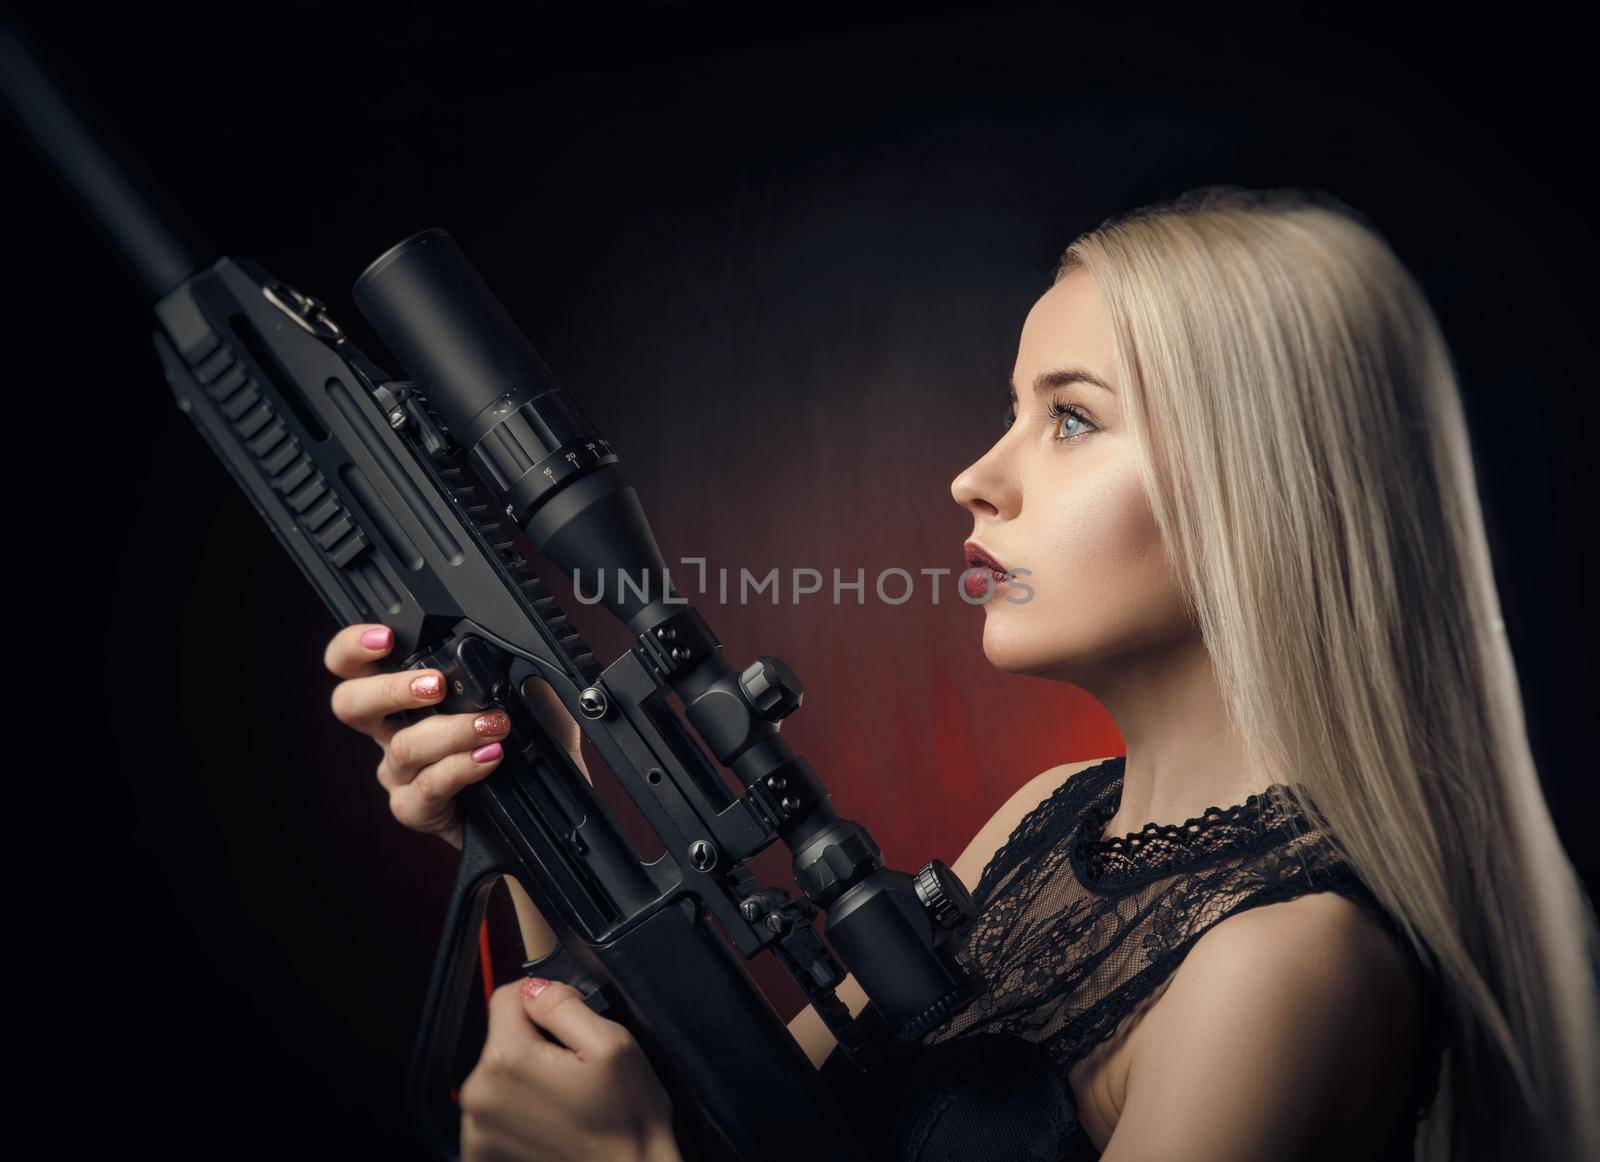 the young blonde girl in black dress posing on black background with weapon